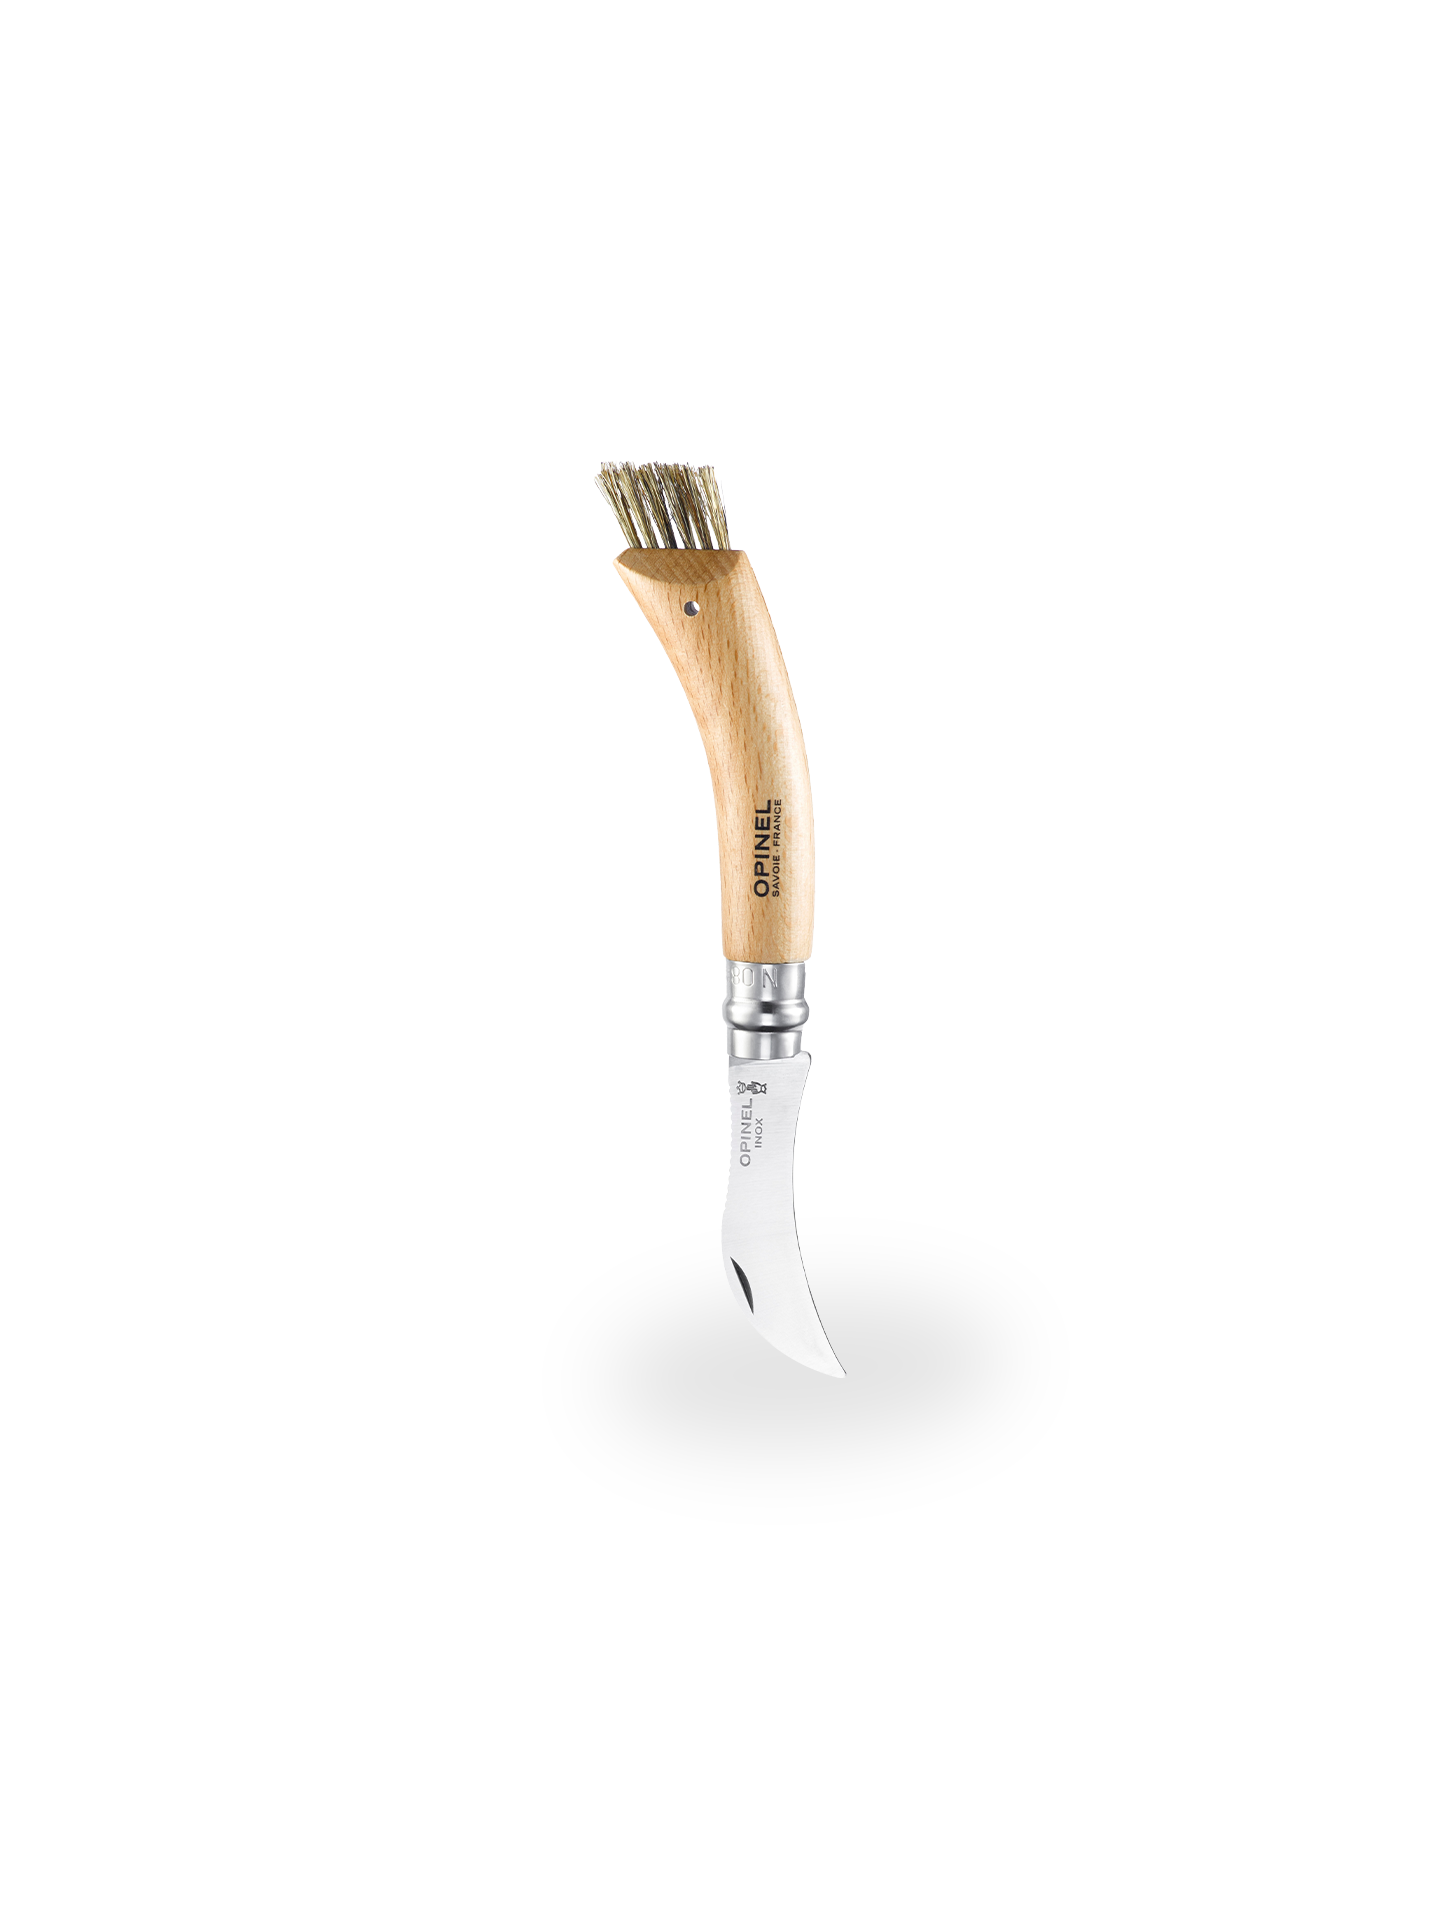 https://gourmetsauvage.ca/app/uploads/2021/05/couteau-opinel.png